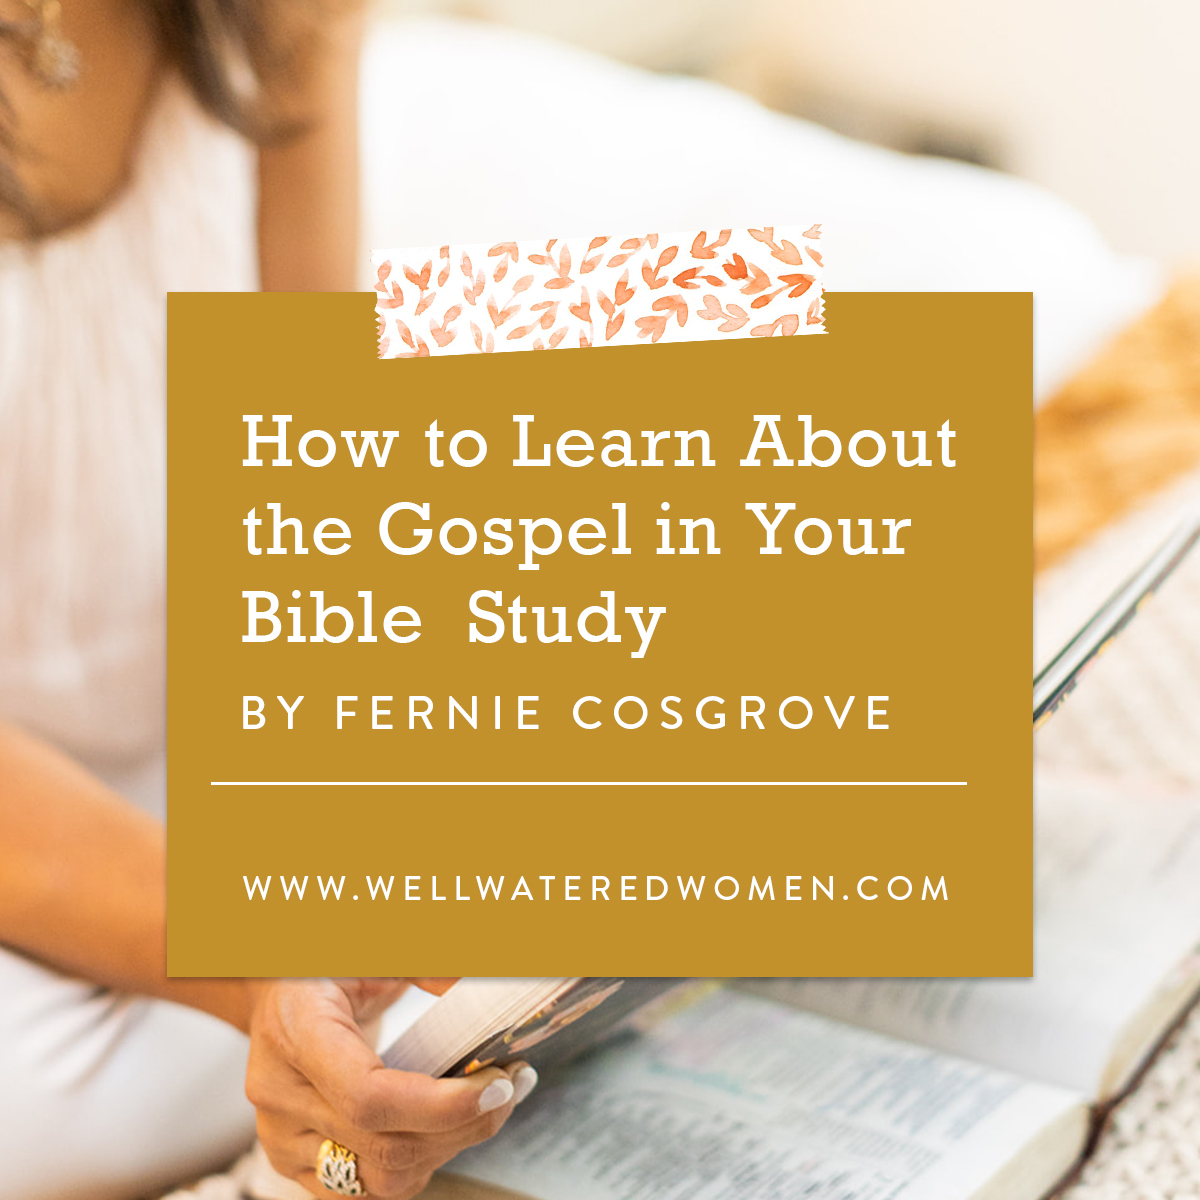 How to Learn About the Gospel in Your Bible Study–an Article by Well-Watered Women